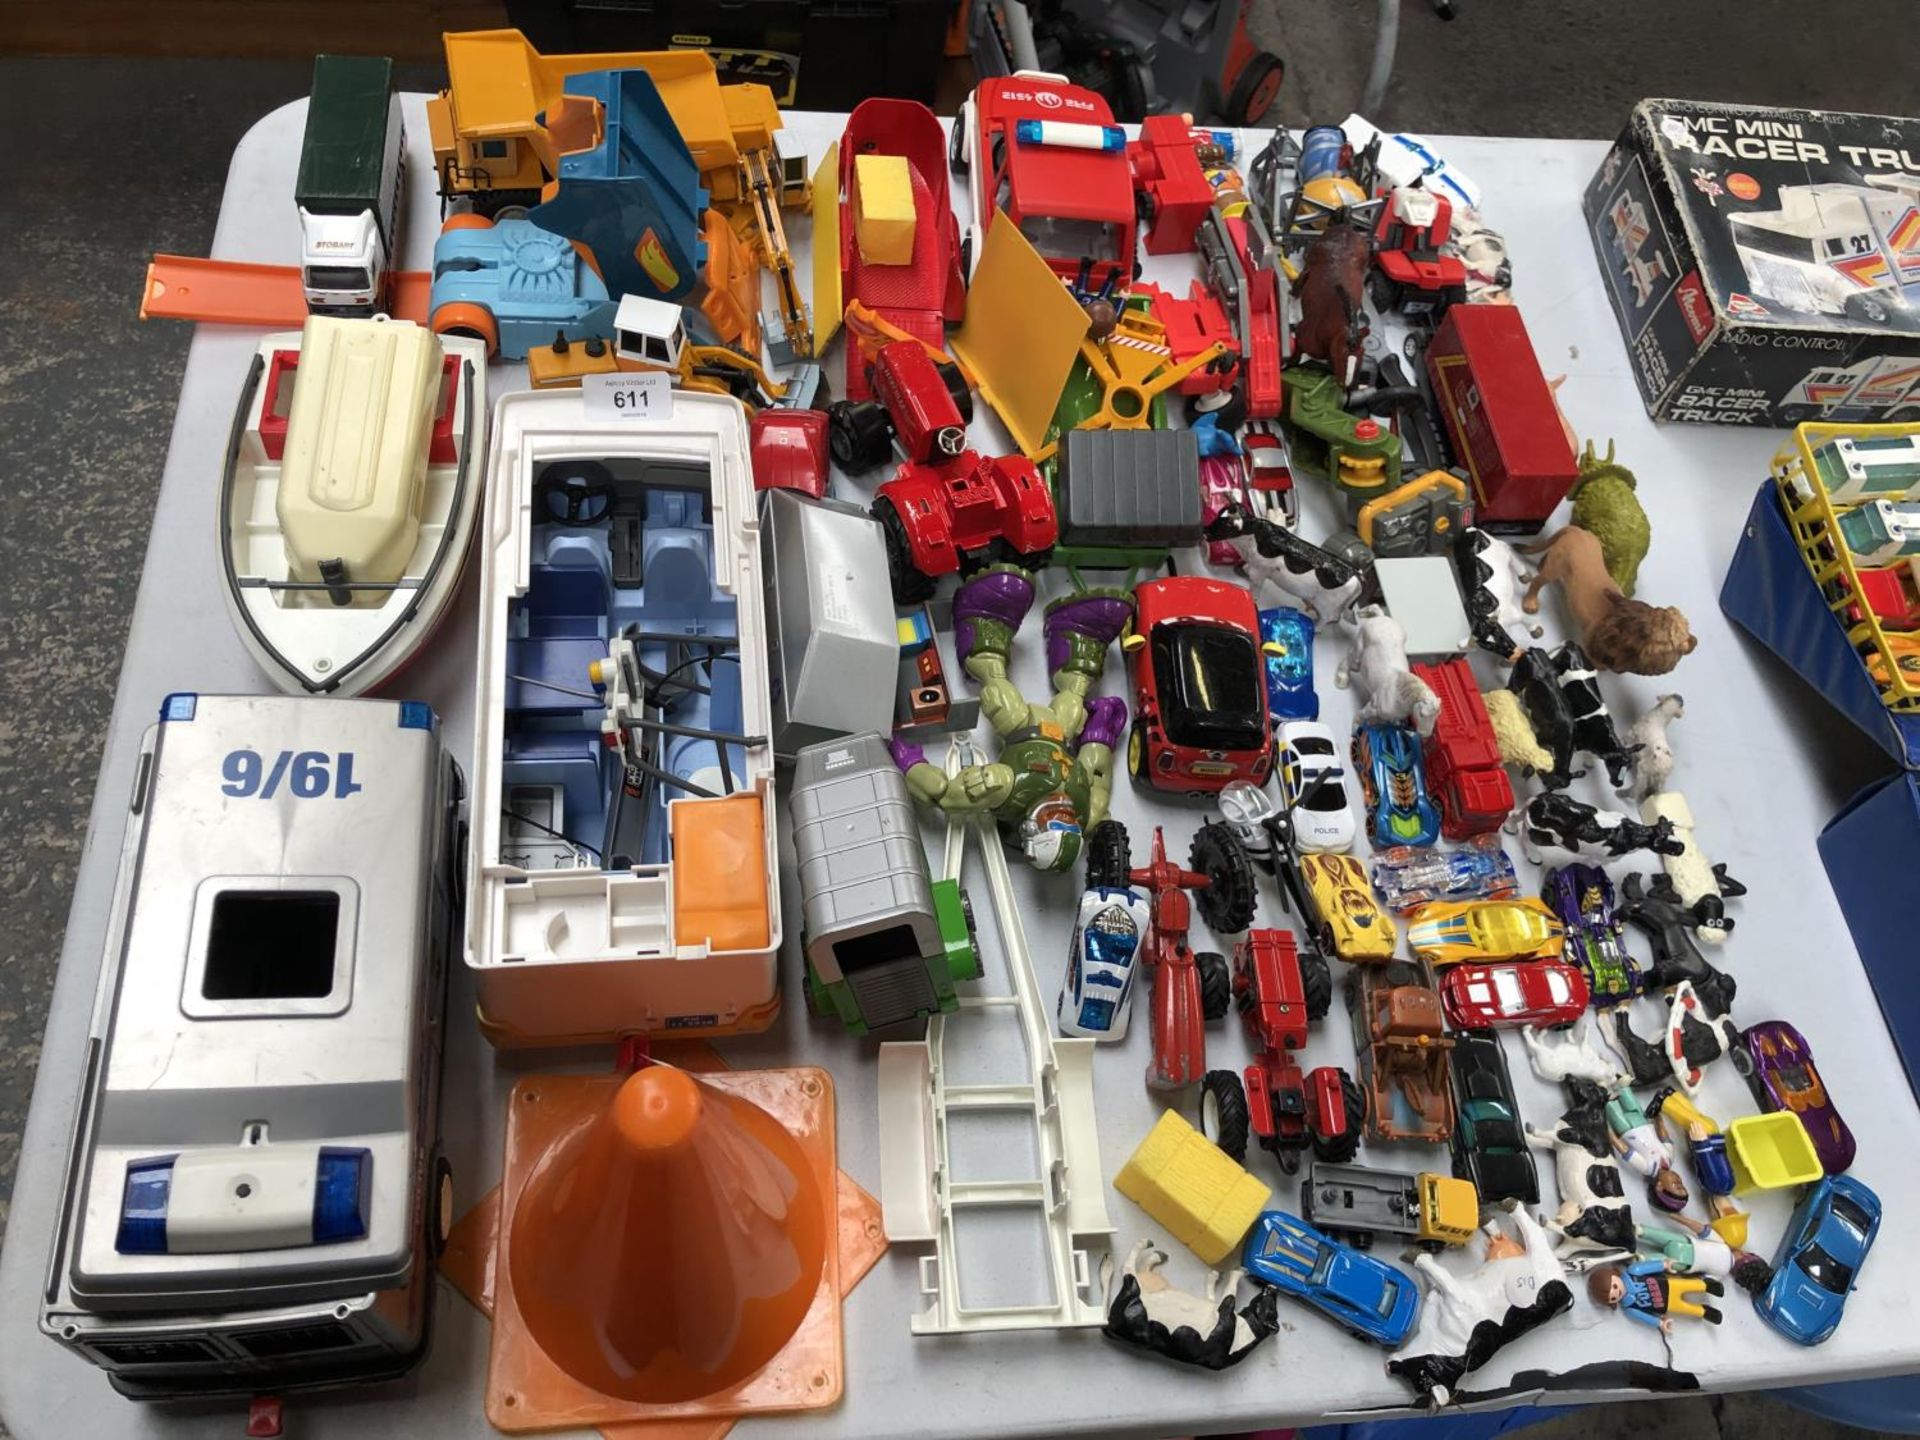 A LARGE GROUP OF LOOSE CHILDREN'S TOYS - CAR MODELS ETC